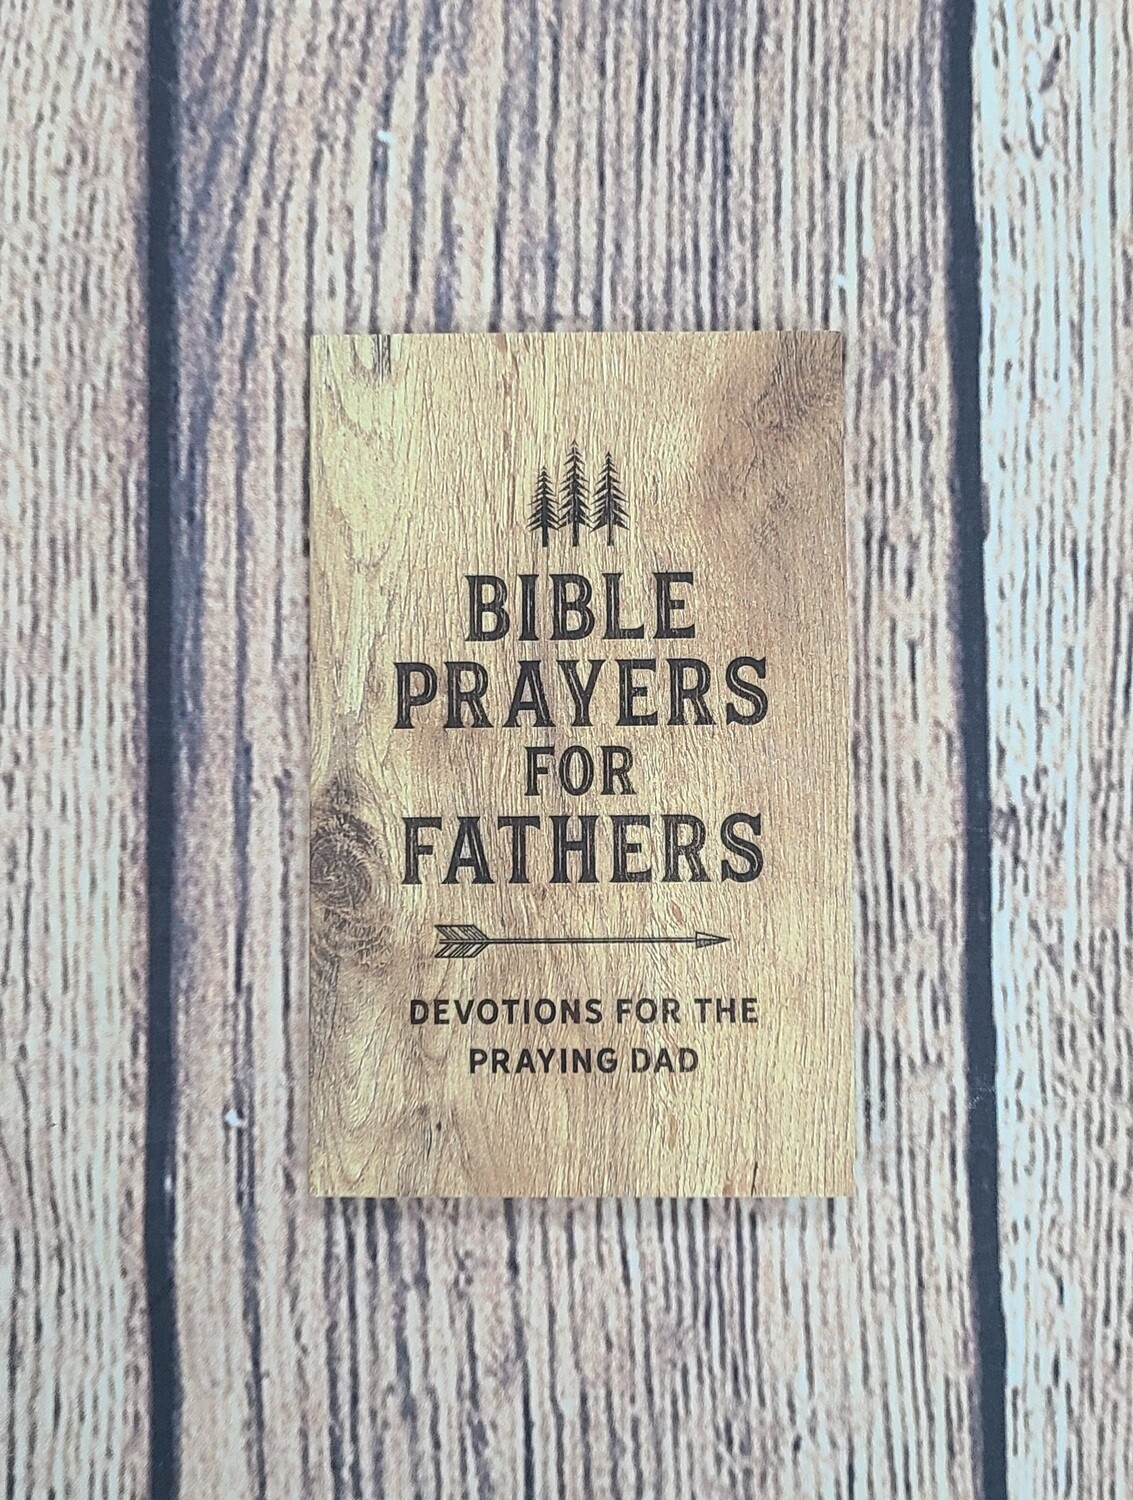 Bible Prayers for Fathers: Devotions for the Praying Dad by Ed Strauss